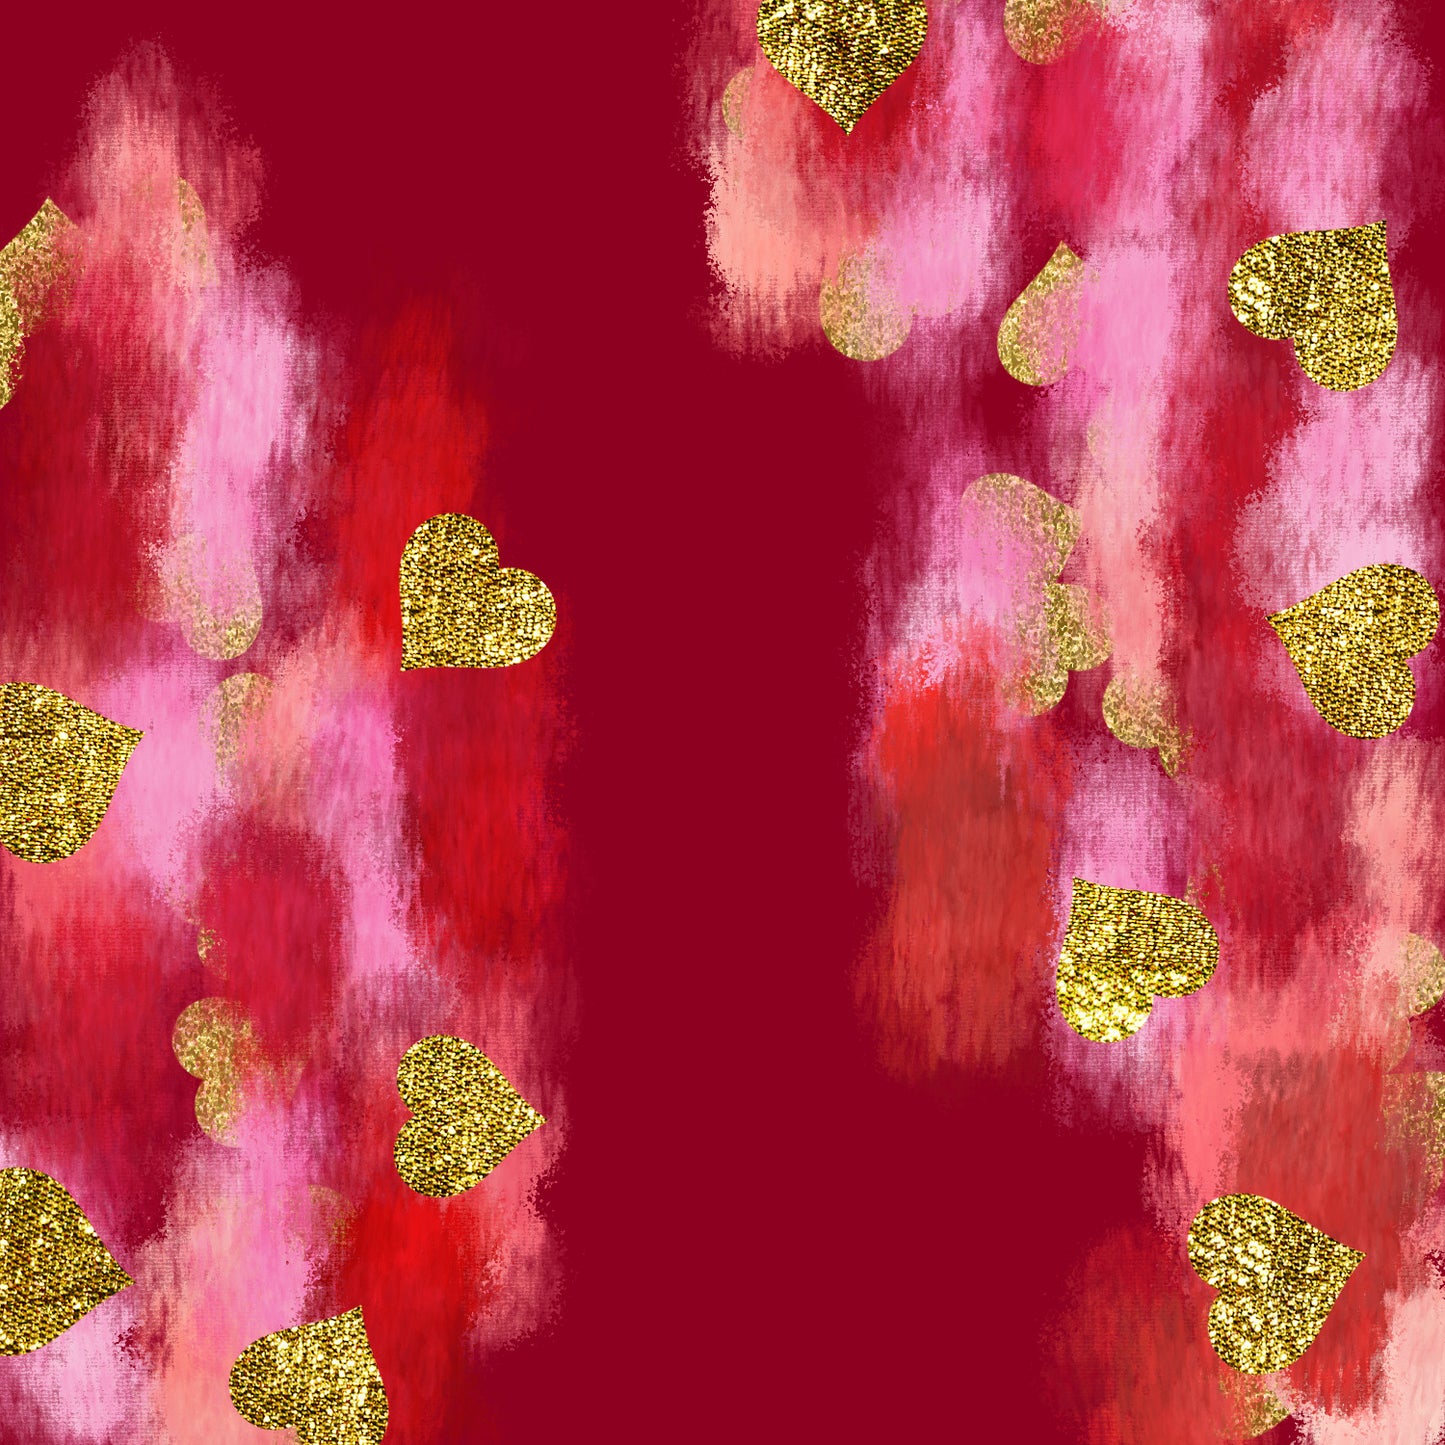 Valentine's Day Photoshop Brush Palettes, Heart Shaped Stamp Brushes, & Ready-Made Backgrounds